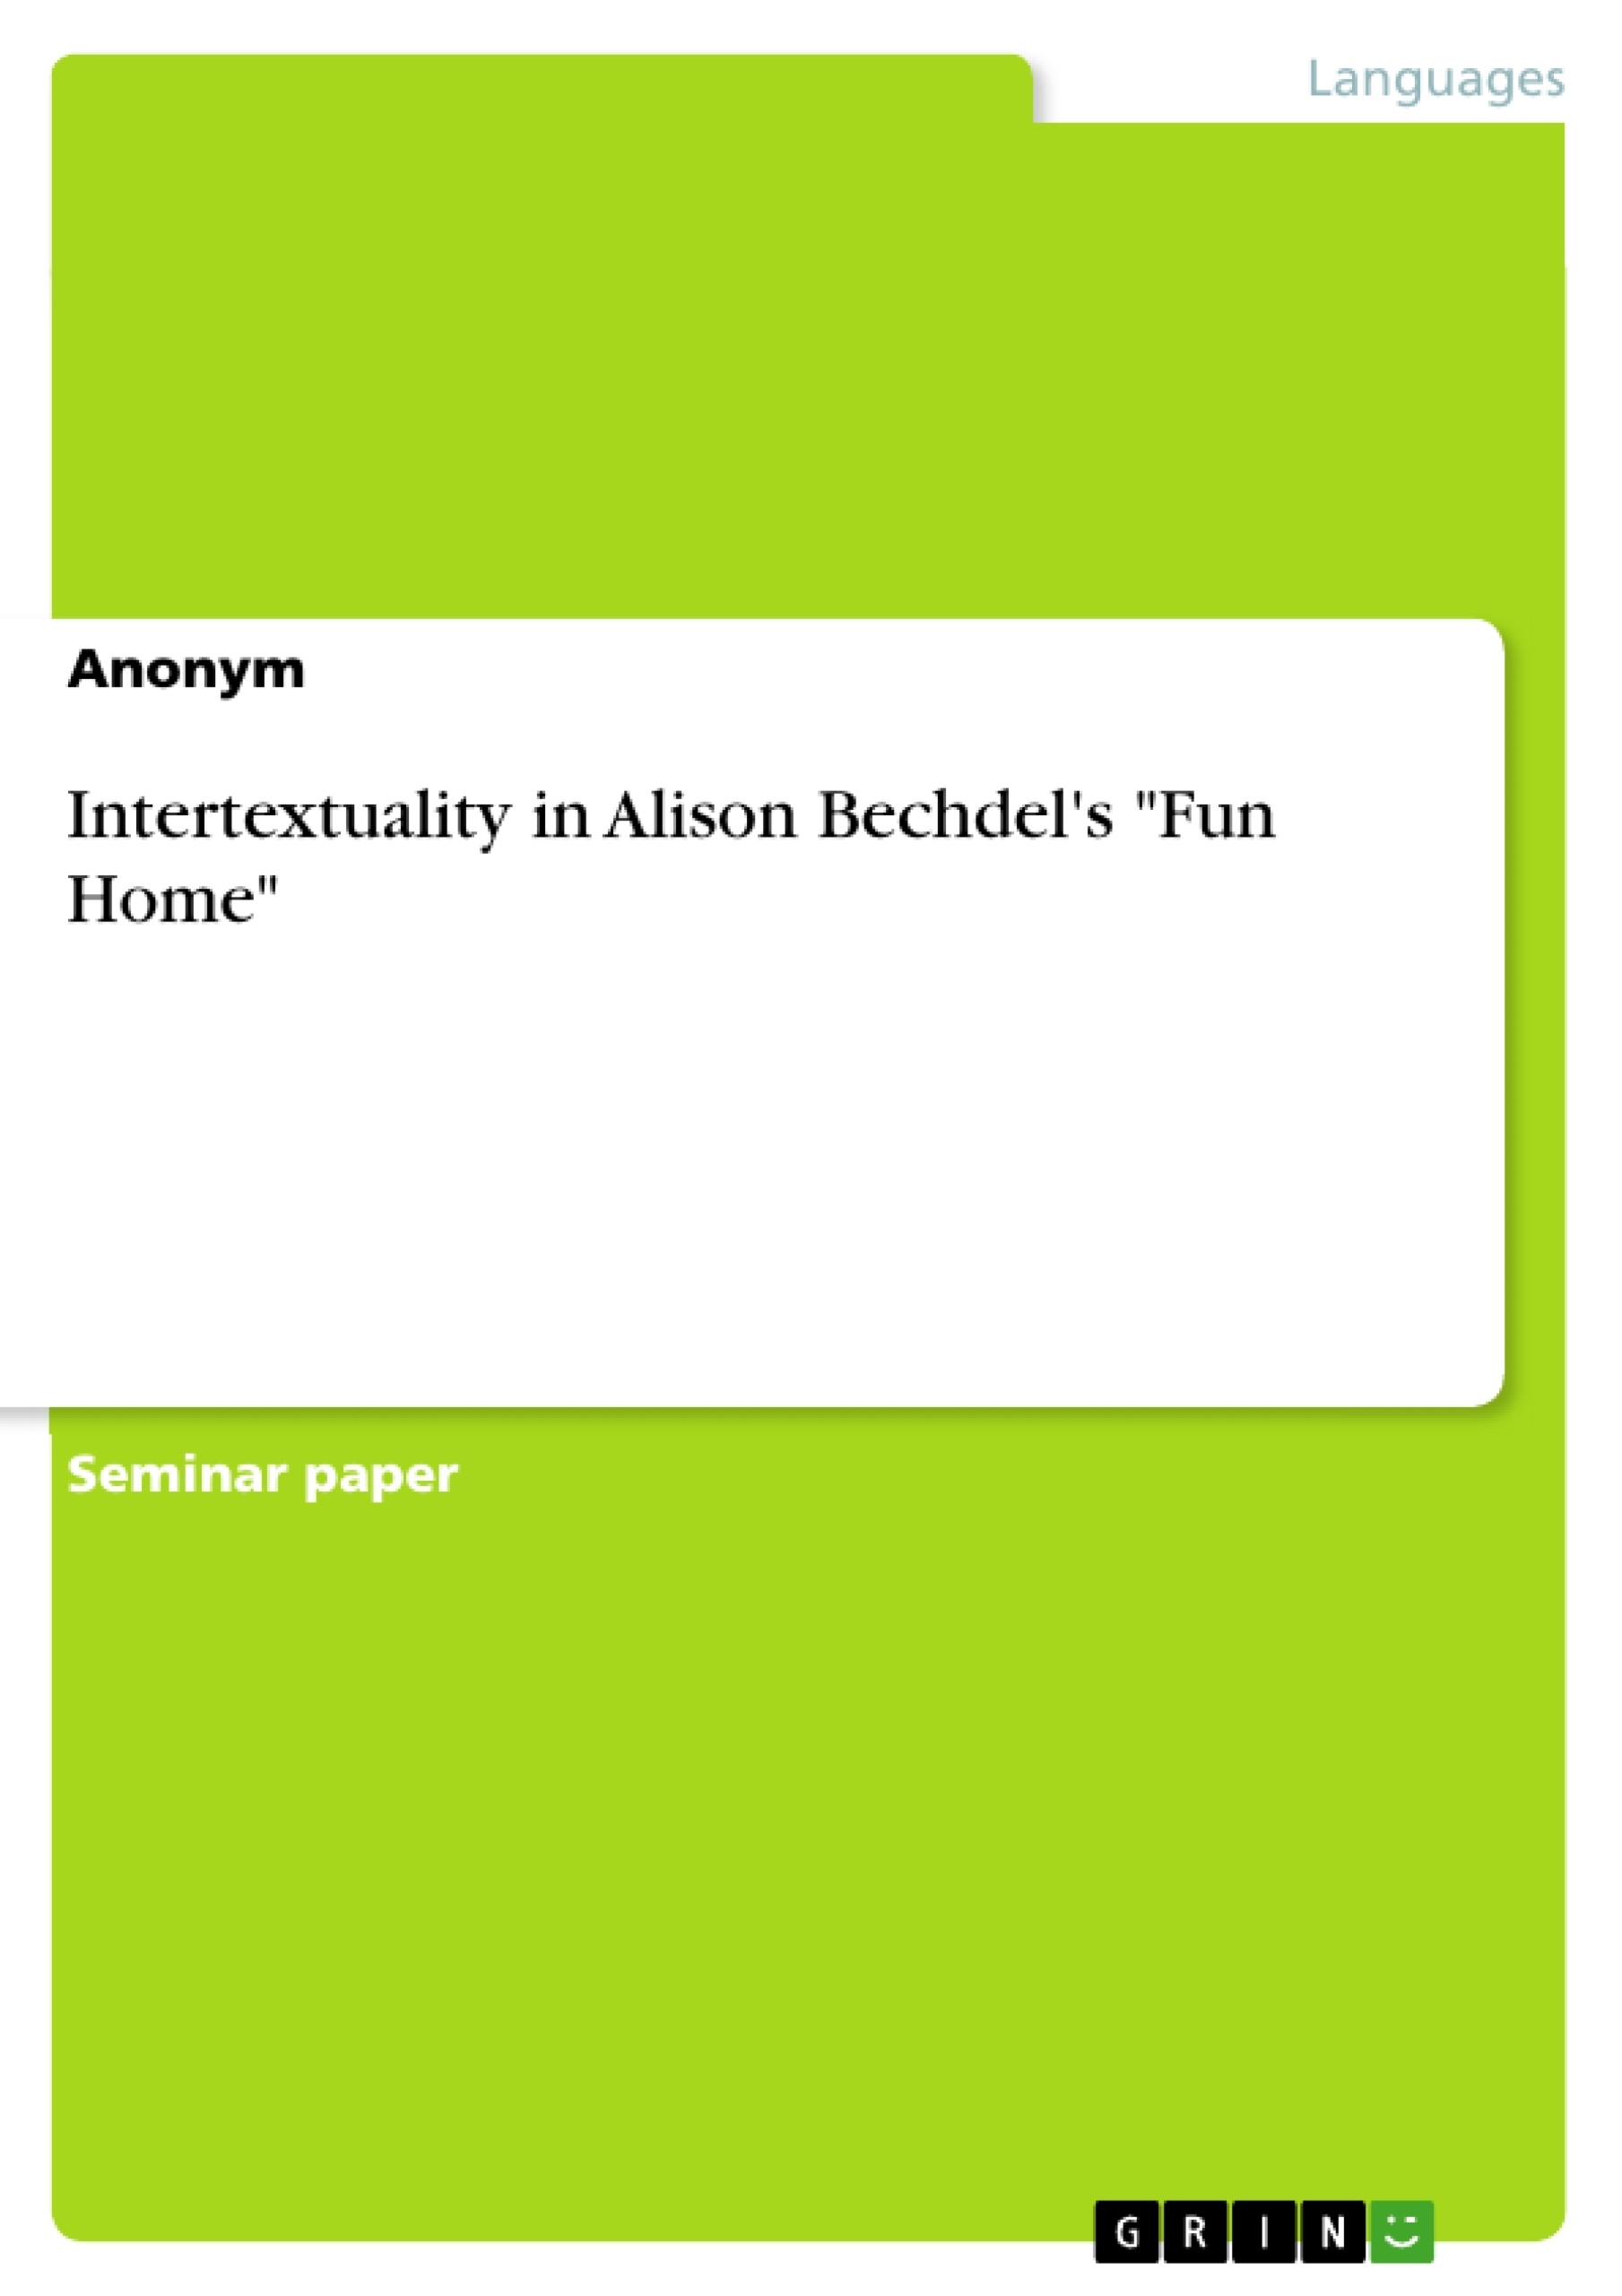 Title: Intertextuality in Alison Bechdel's "Fun Home"